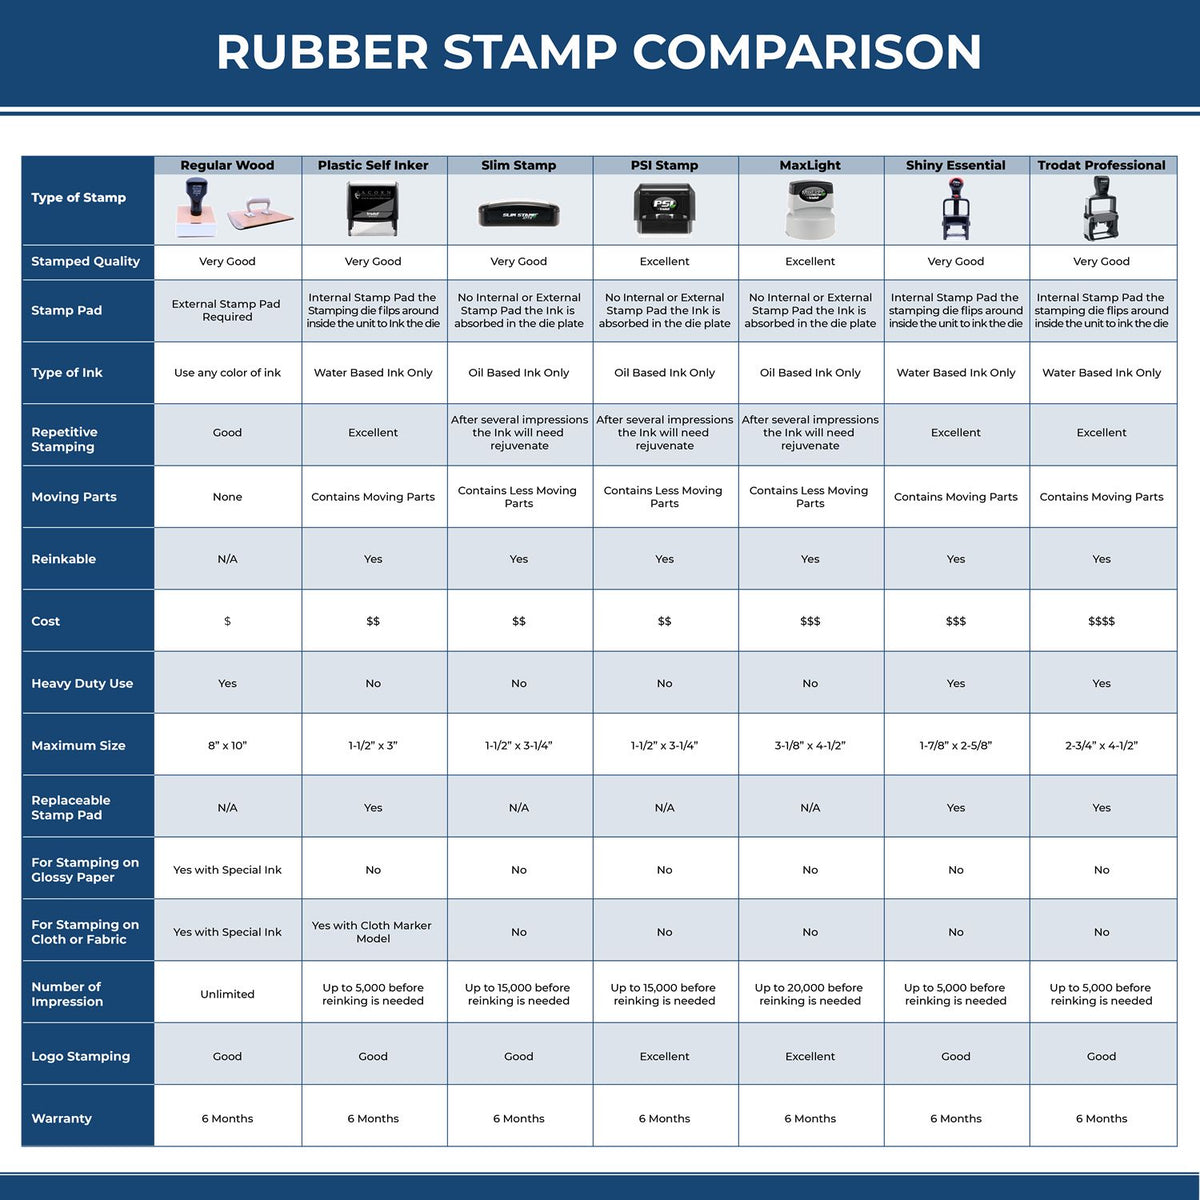 Jumbo Bold Red Faxed Xstamper Stamp 5106 Rubber Stamp Comparison